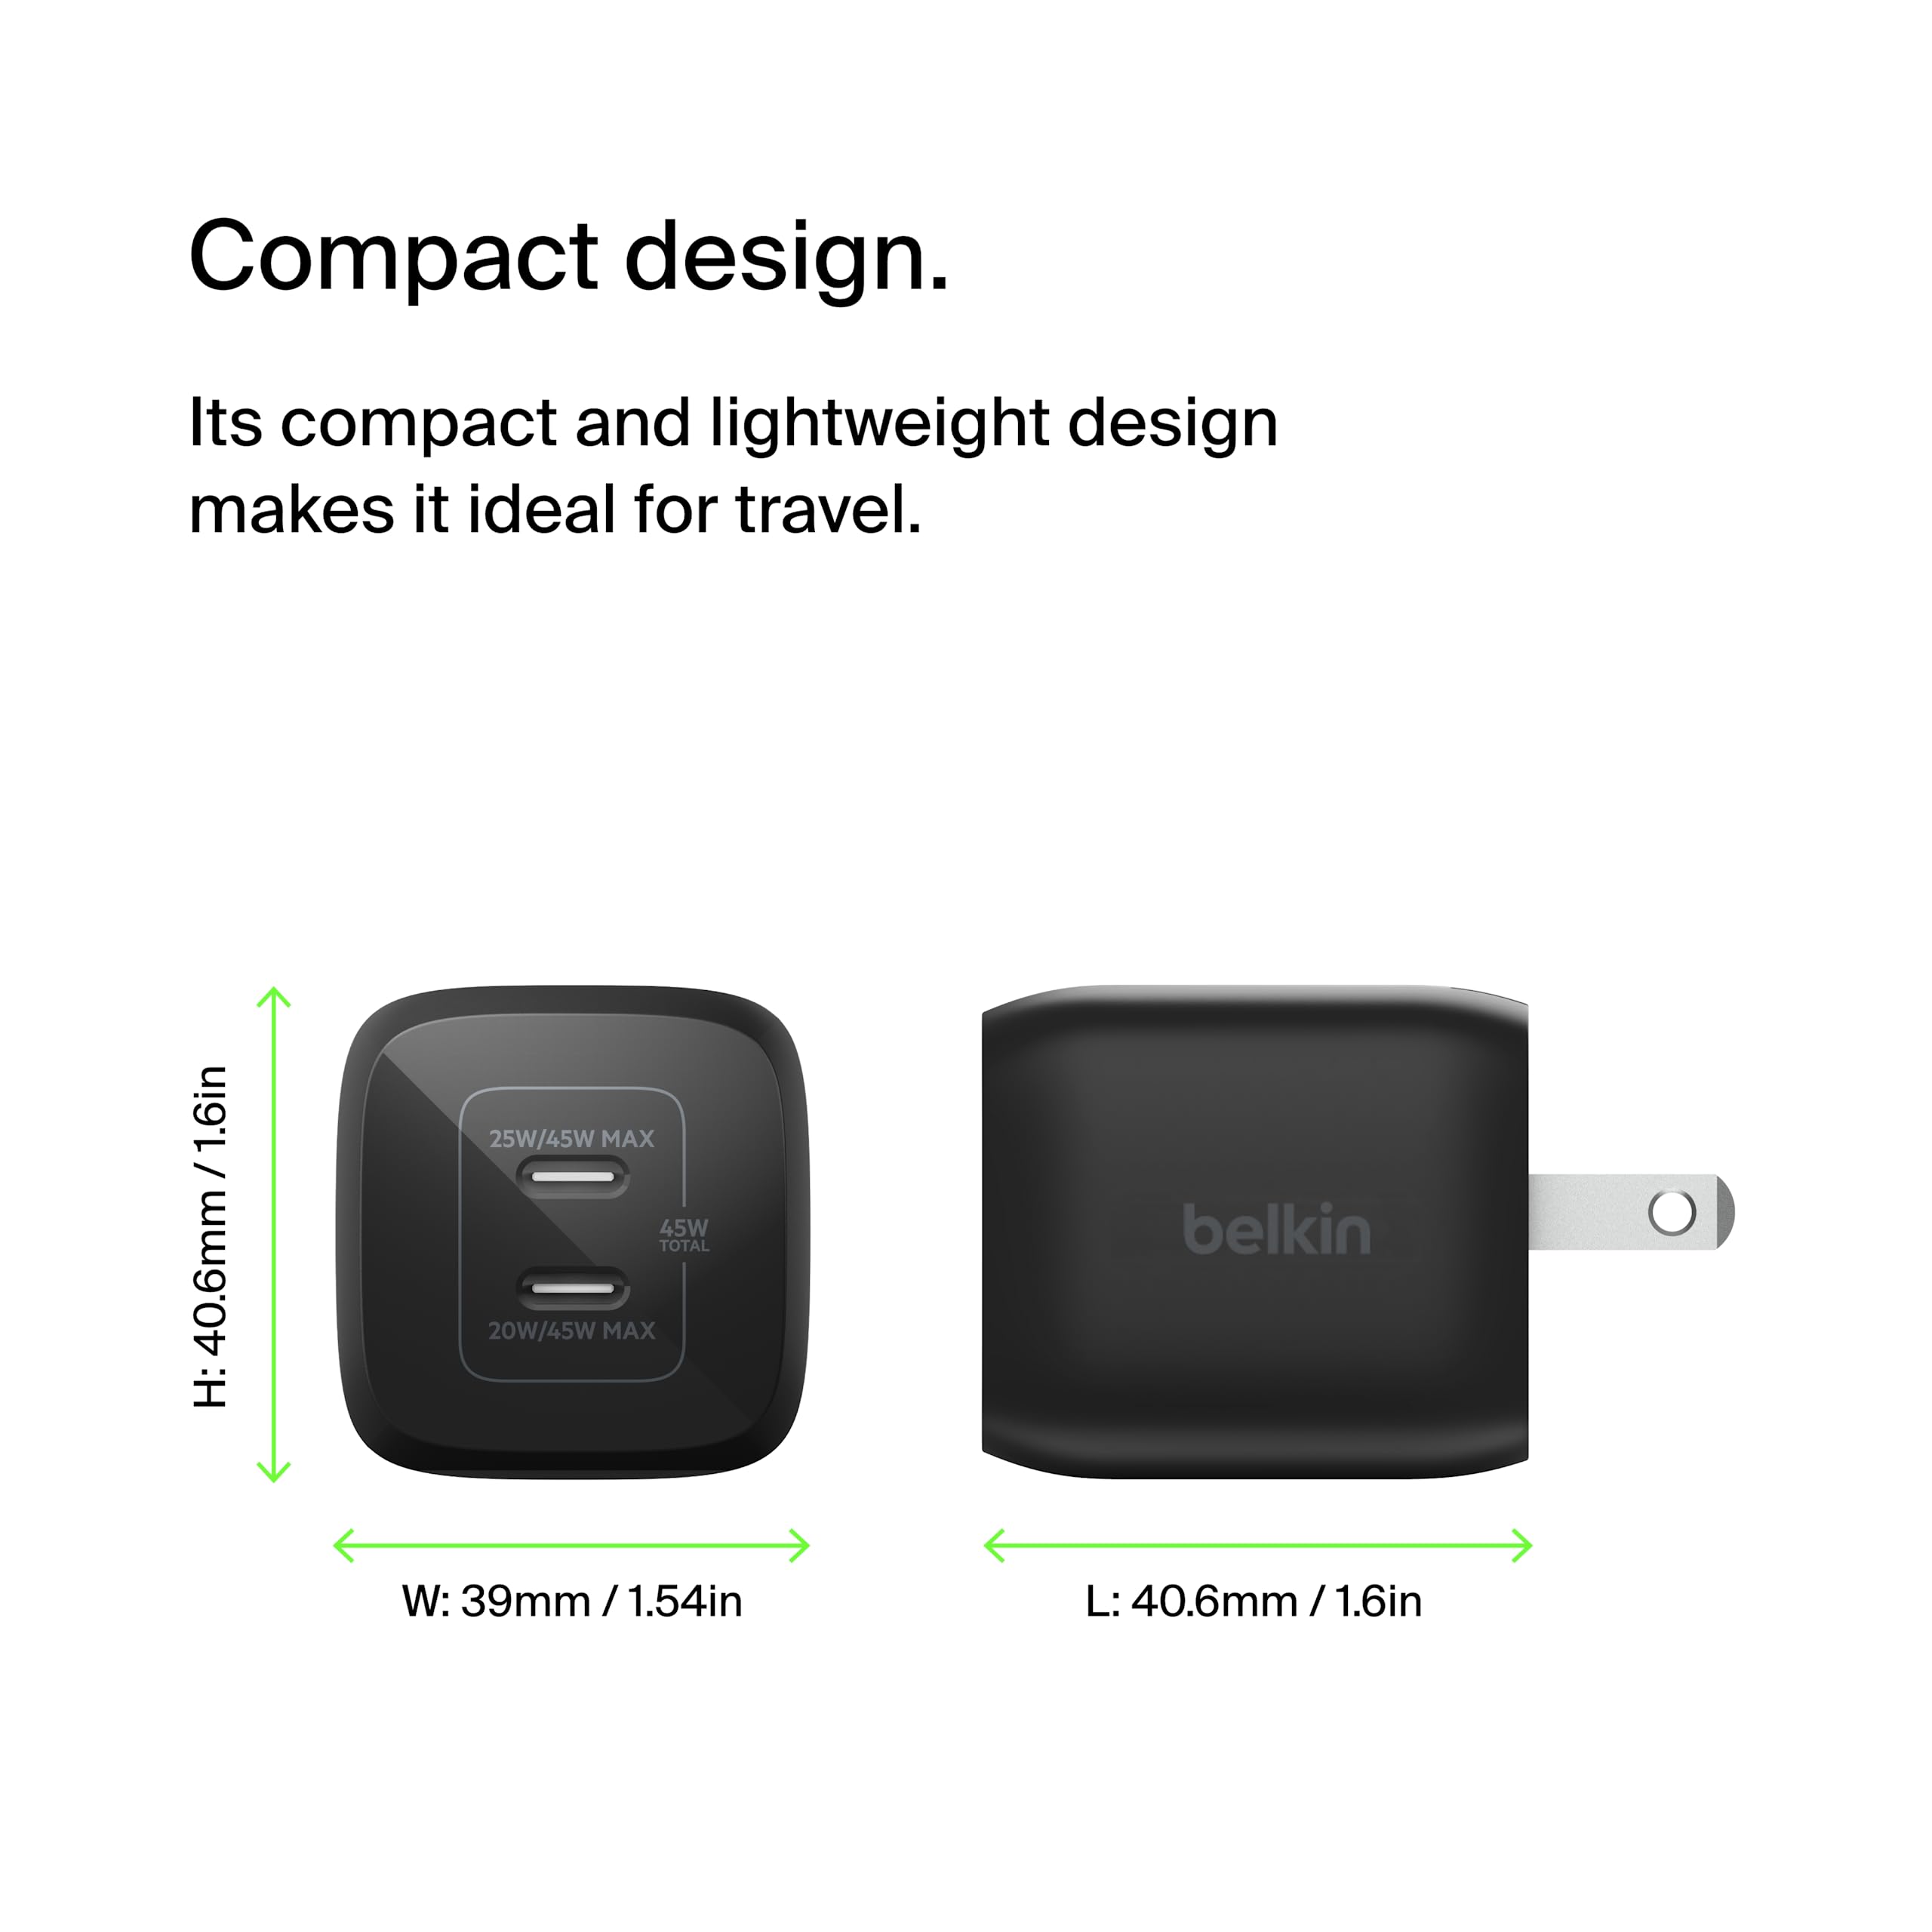 Belkin 45W Dual USB-C Wall Charger, Fast Charging Power Delivery 3.0 with GaN Technology for iPhone 14, 13, Pro, Pro Max, Mini, iPad Pro 12.9, MacBook, Galaxy S23, S23+, Ultra, Tablet, More - Black